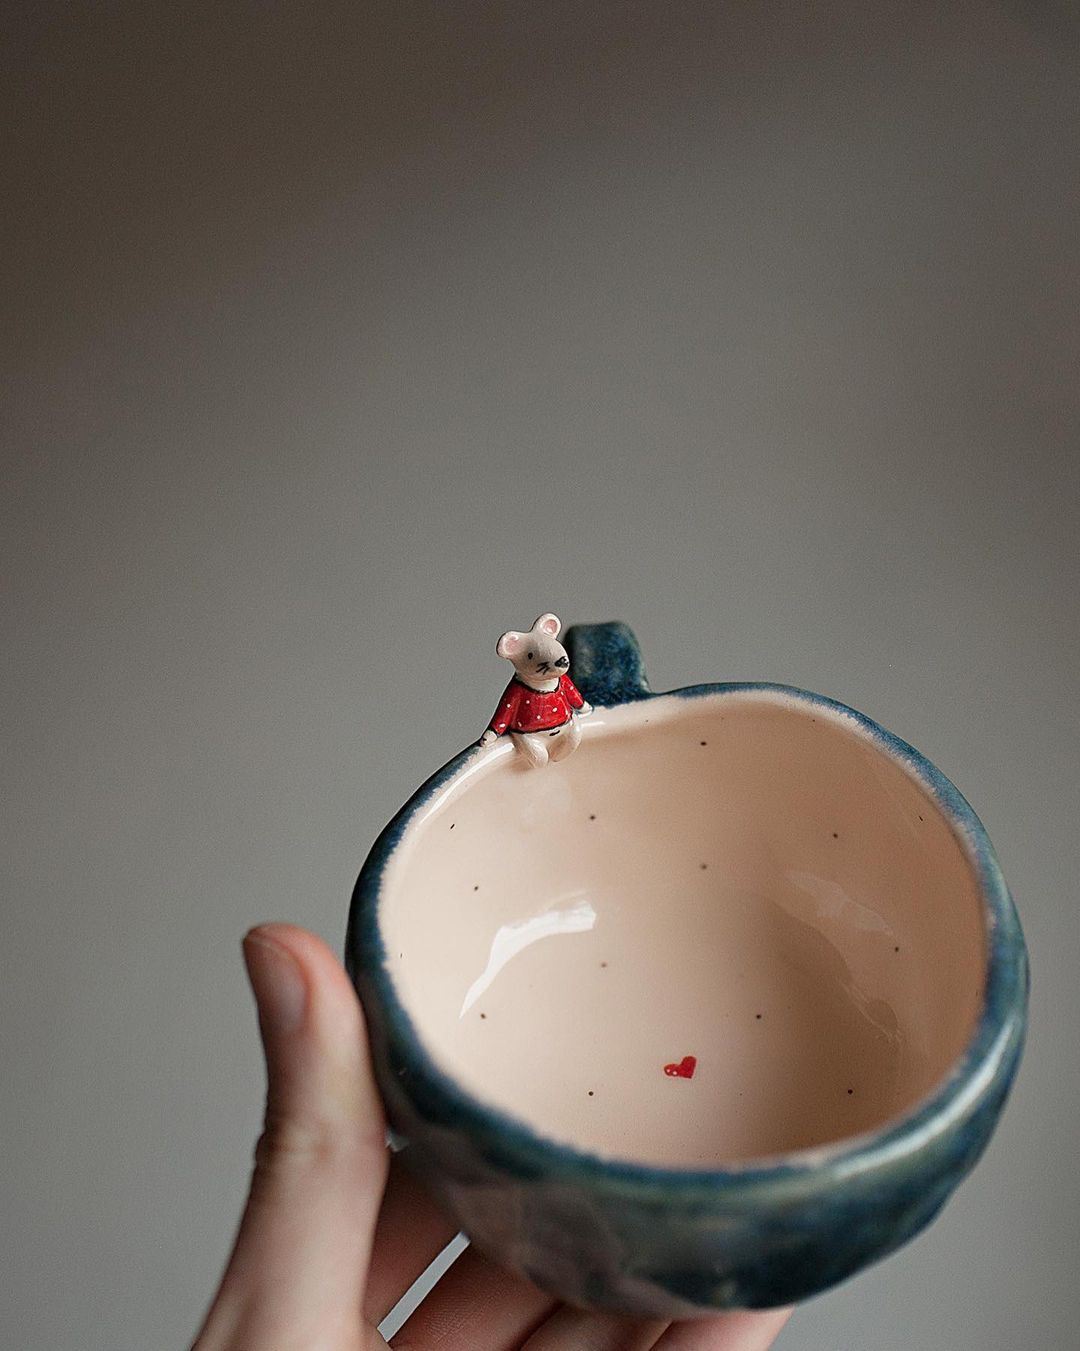 Delicate Ceramics Decorated With Lovely Figure Sculptures By Nadya And Olga (10)